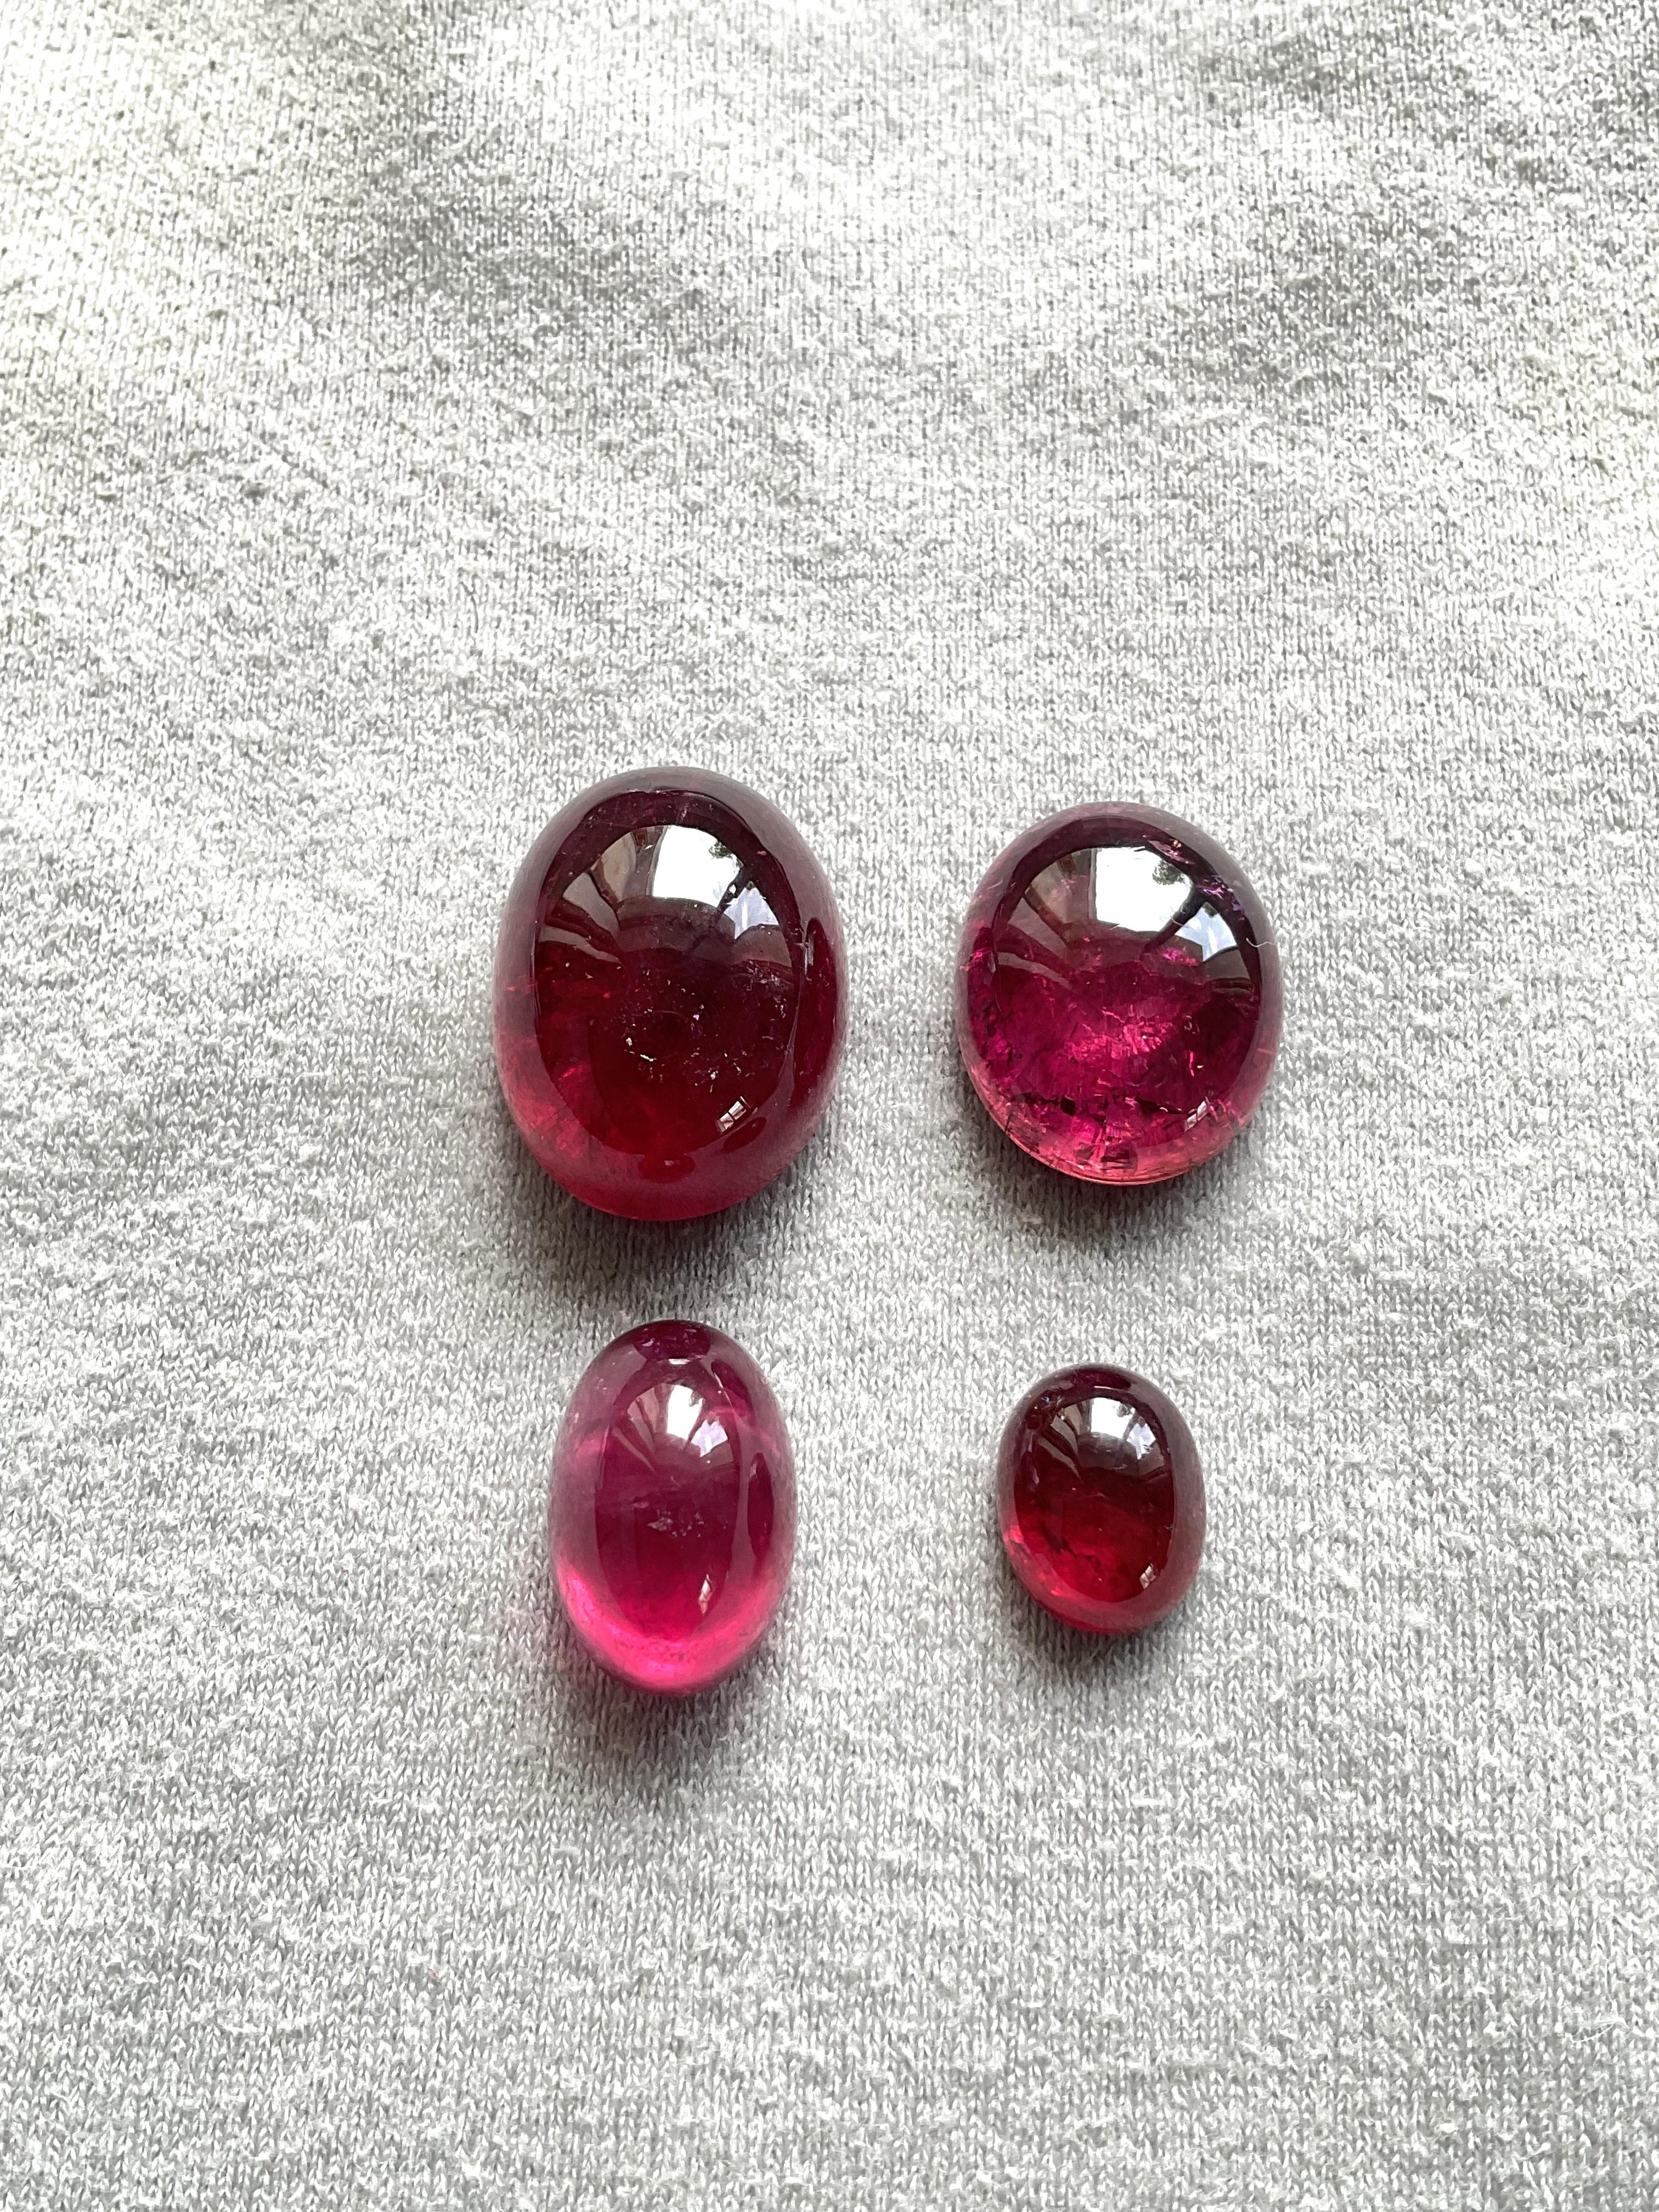 Women's or Men's 92.86 Carats Top Quality Rubellite Tourmaline Cabochon 4 Pieces Natural Gemstone For Sale